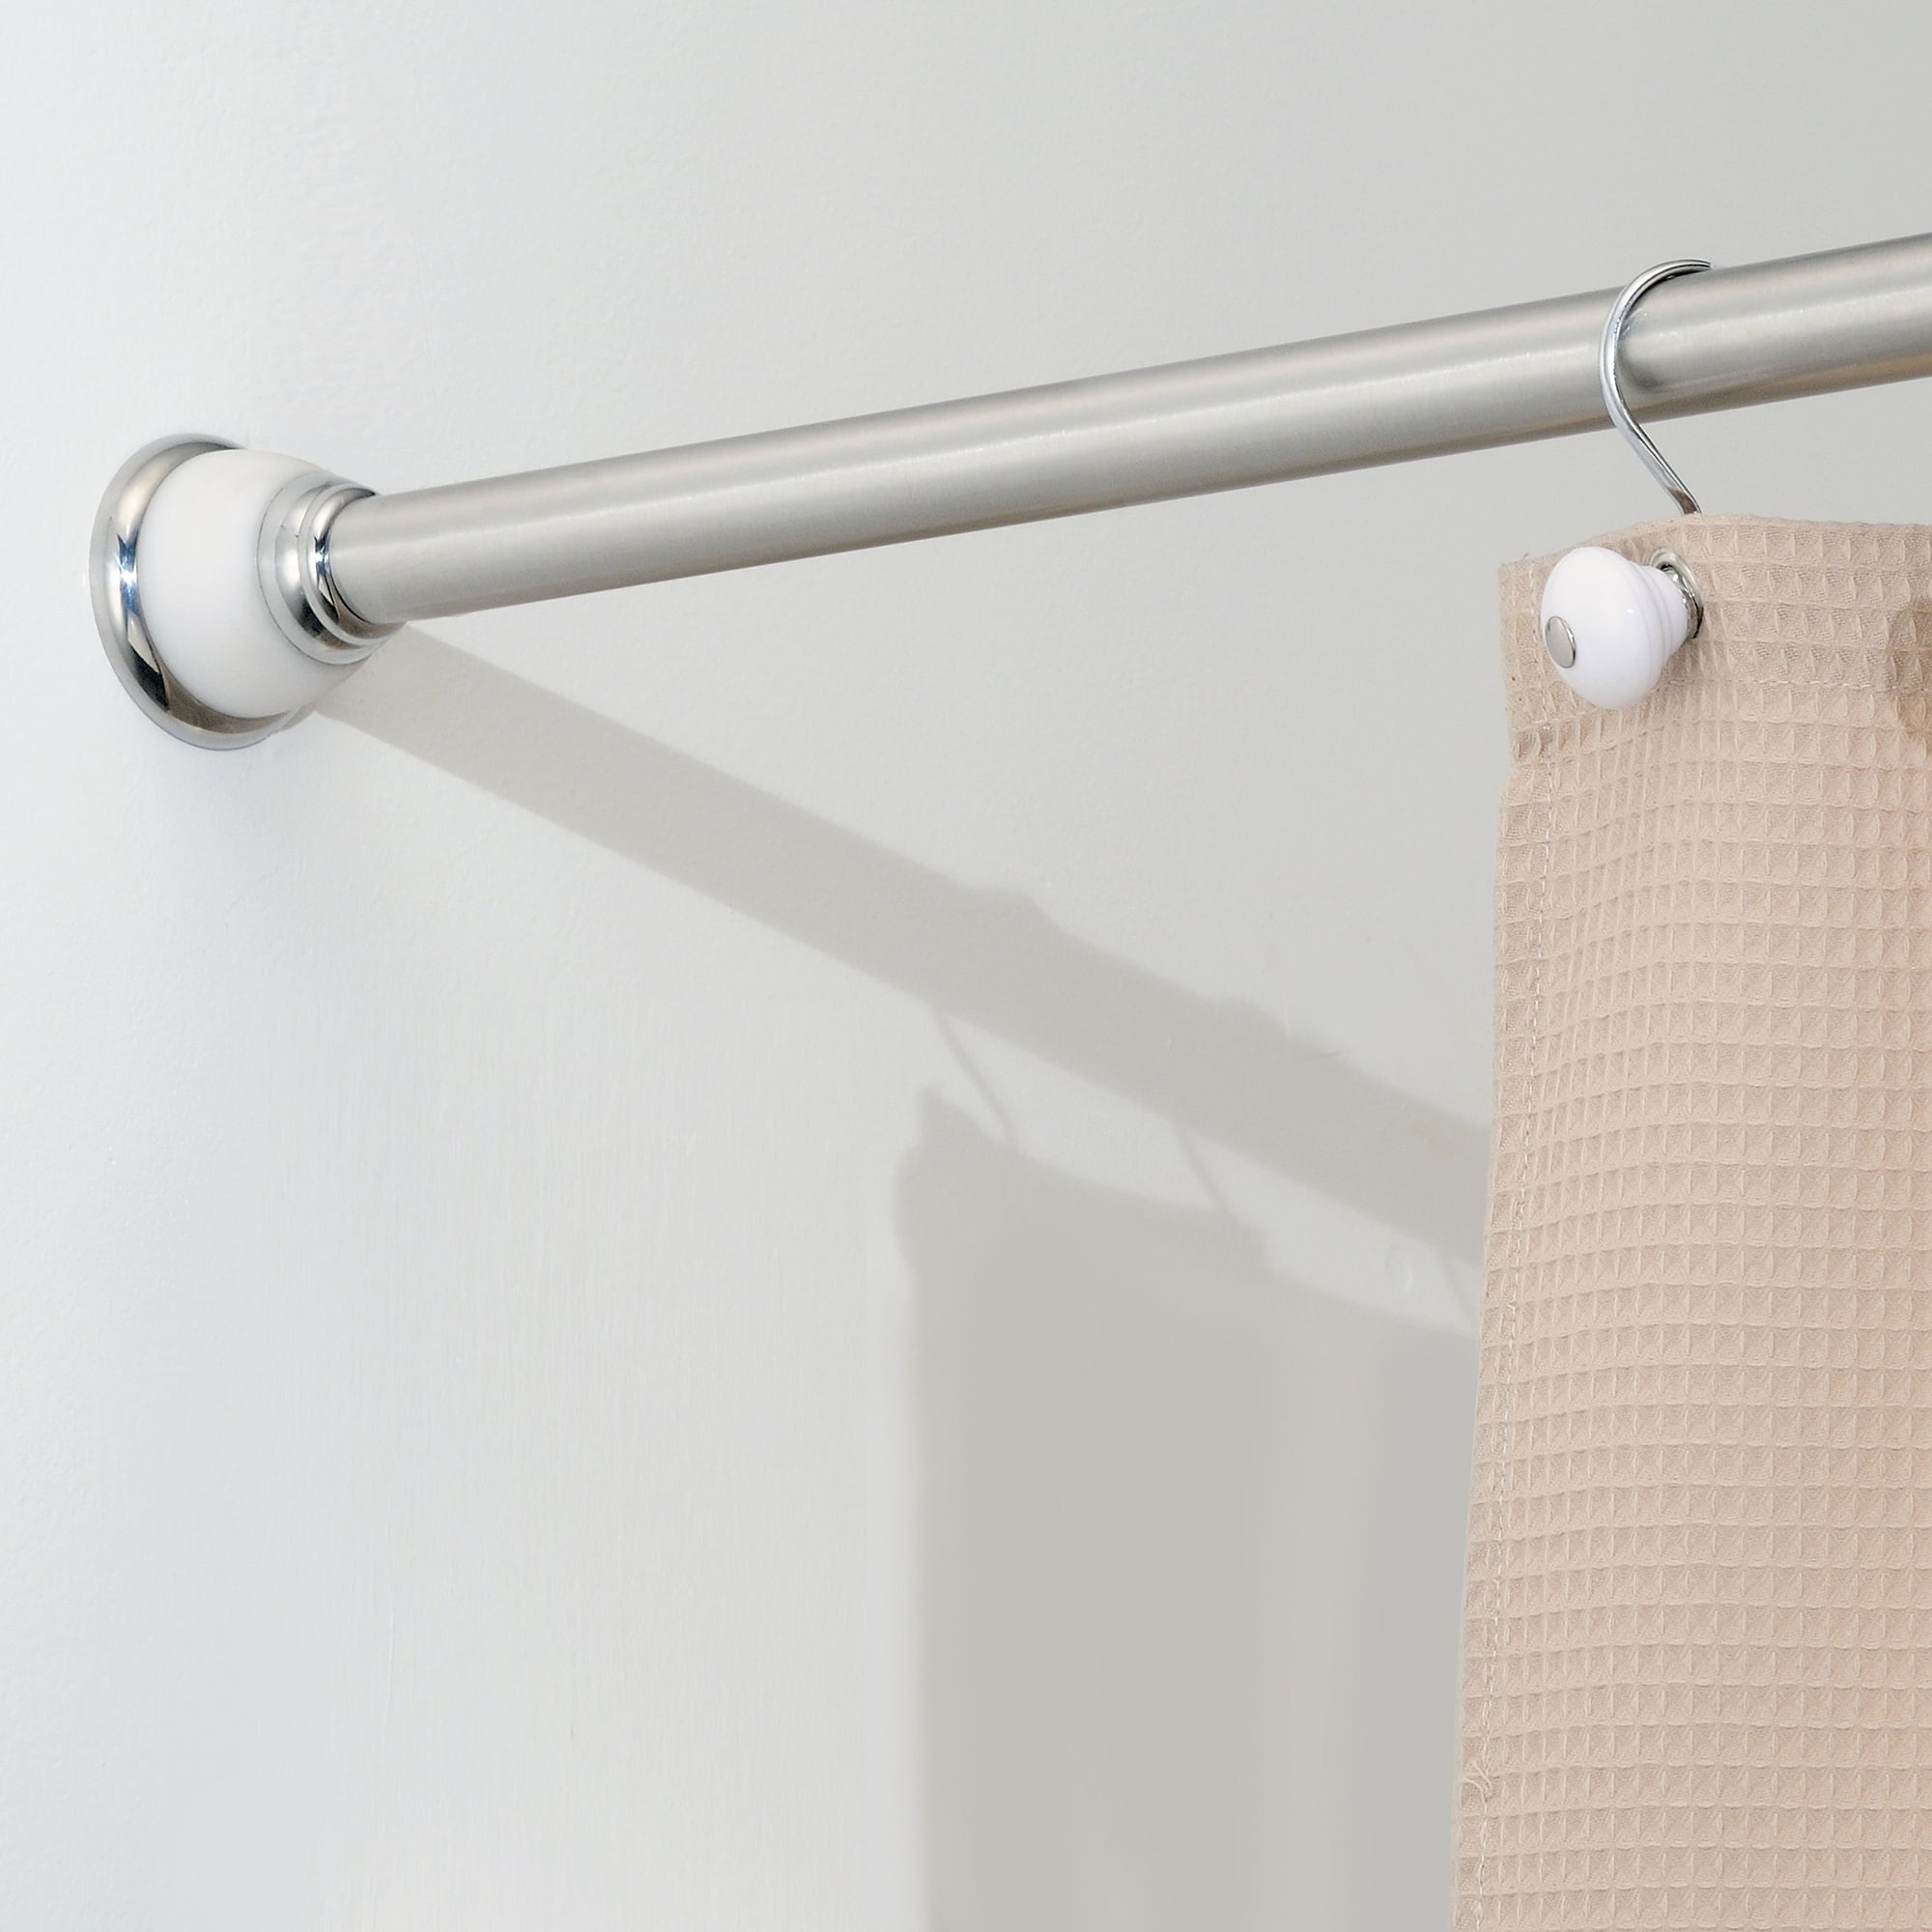 Shower Curtain Tension Rod, How To Adjust Spring Loaded Shower Curtain Rod